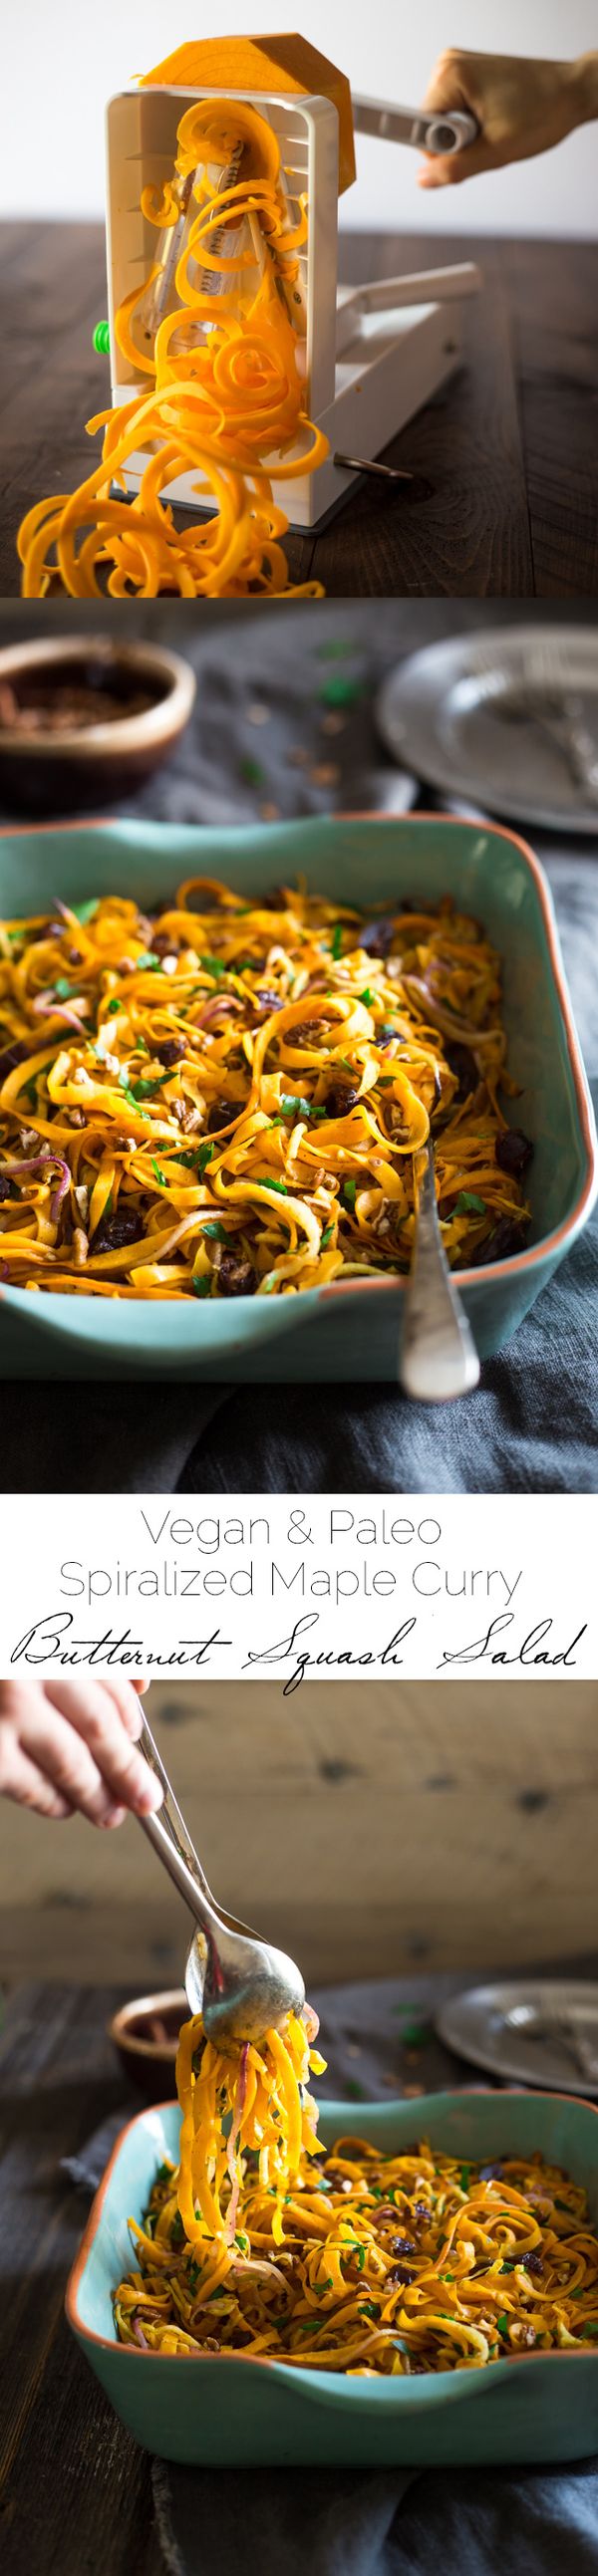 Paleo & Vegan Curried Butternut Squash Salad with Apples, Dates and Pecans